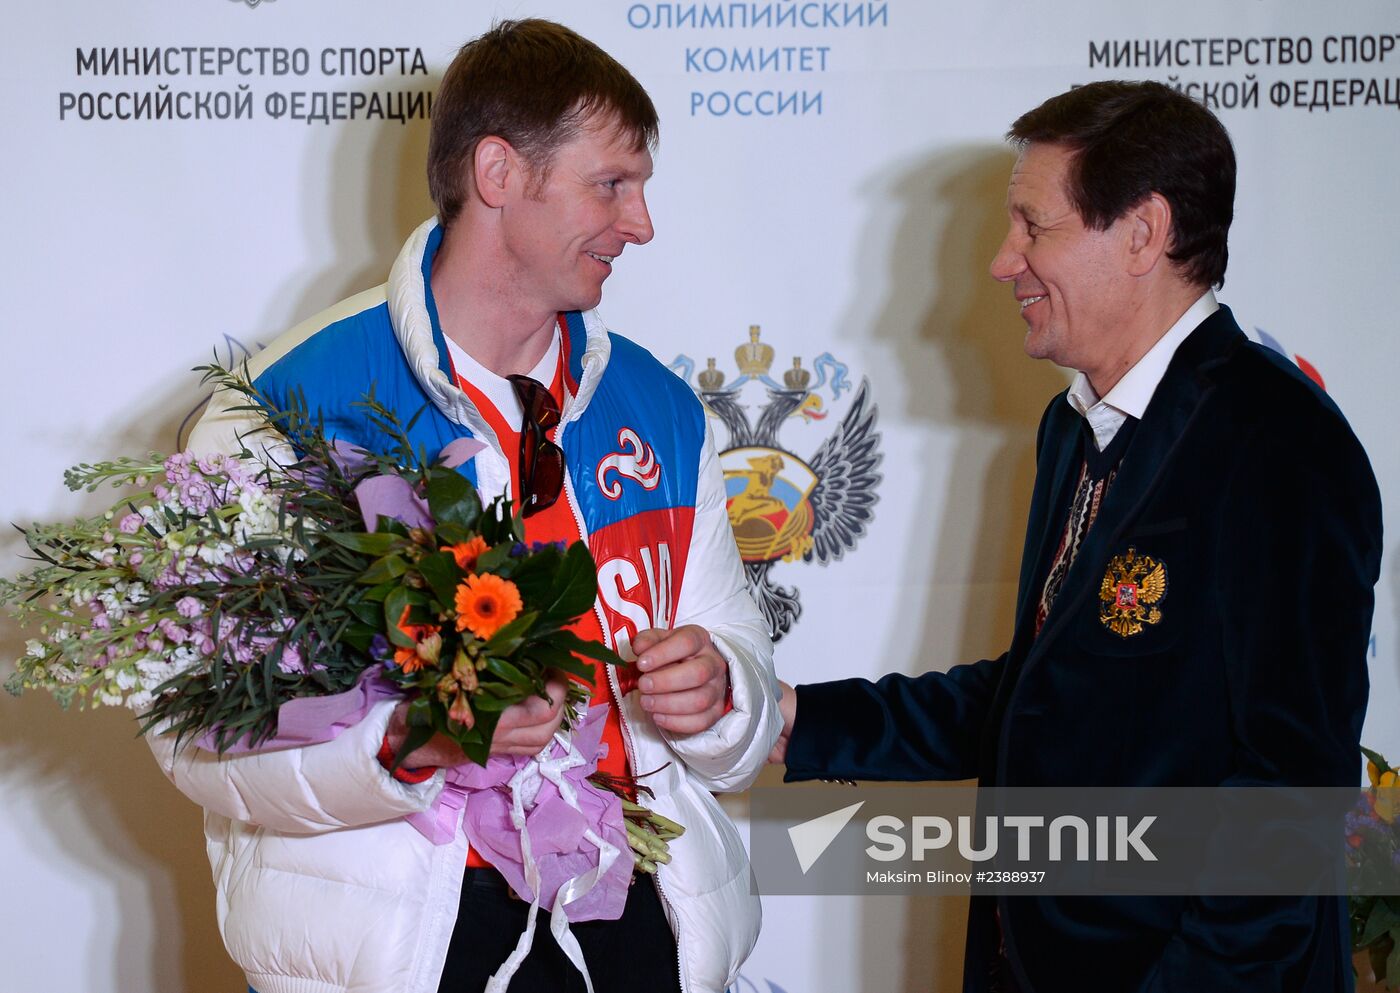 "Golden flight" with medalists of XXII Olympic Winter Games welcomed in Moscow